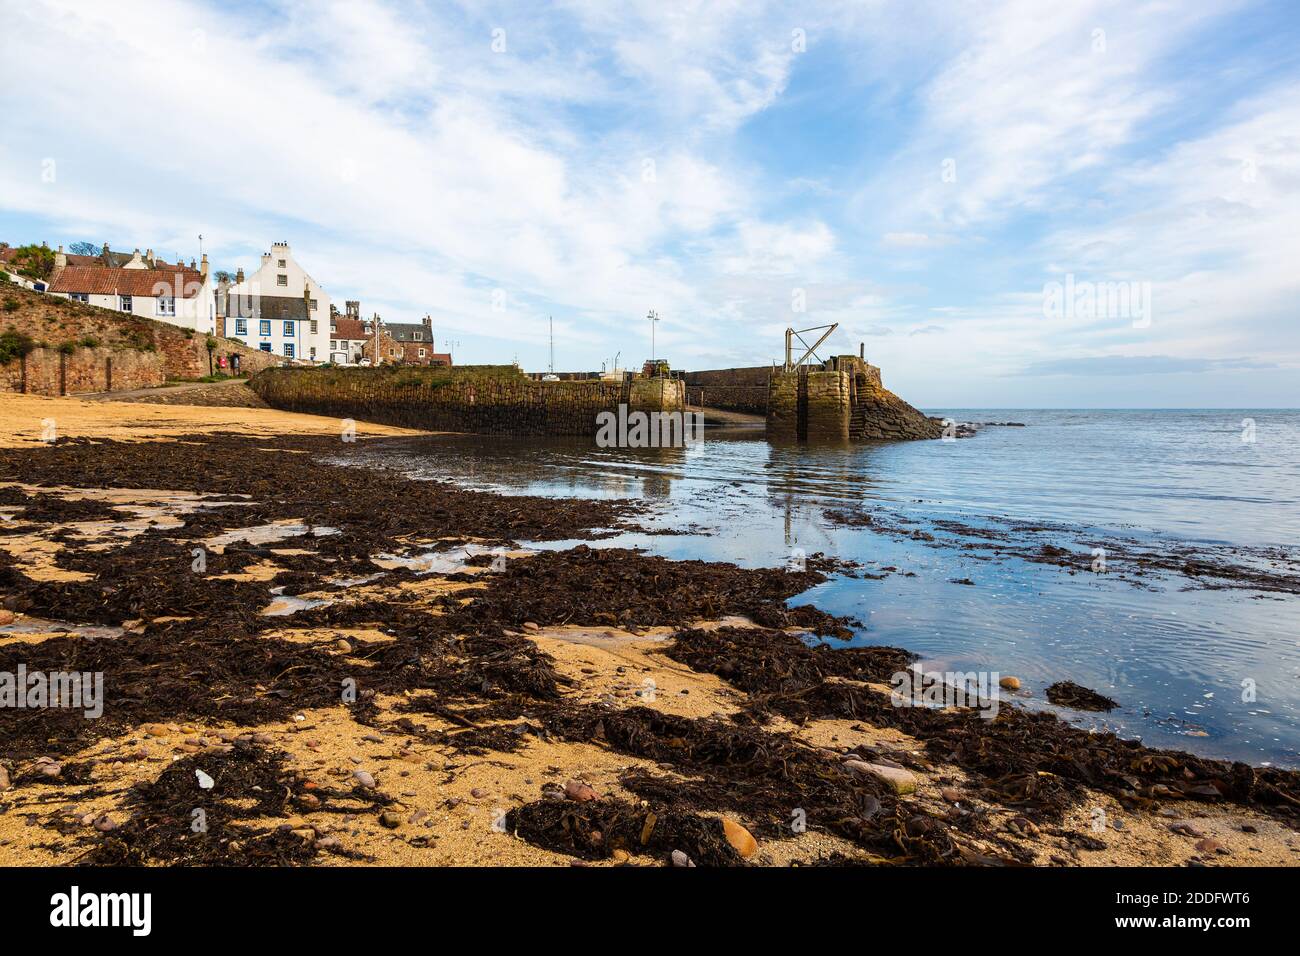 Crail Harbour is completely empty of water at low tide, with the small boats sitting on the sandy bottom. Here, the tide is incoming. There is huge am Stock Photo